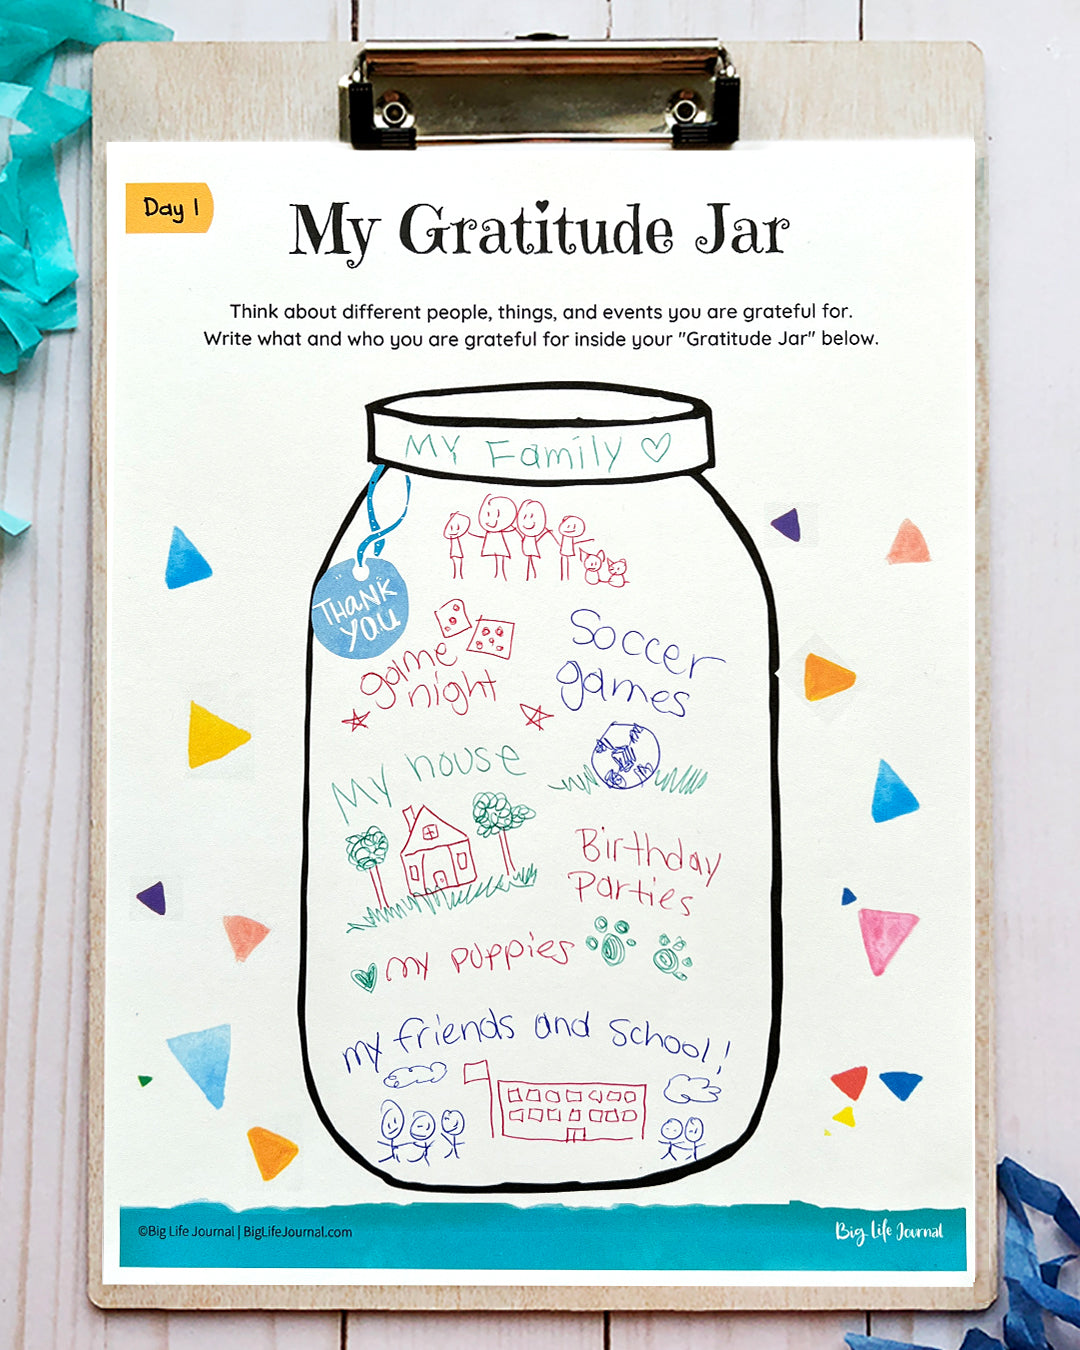 Teaching Guide PDF for Big Life Journal - Tween/Teen Edition (ages 11+)